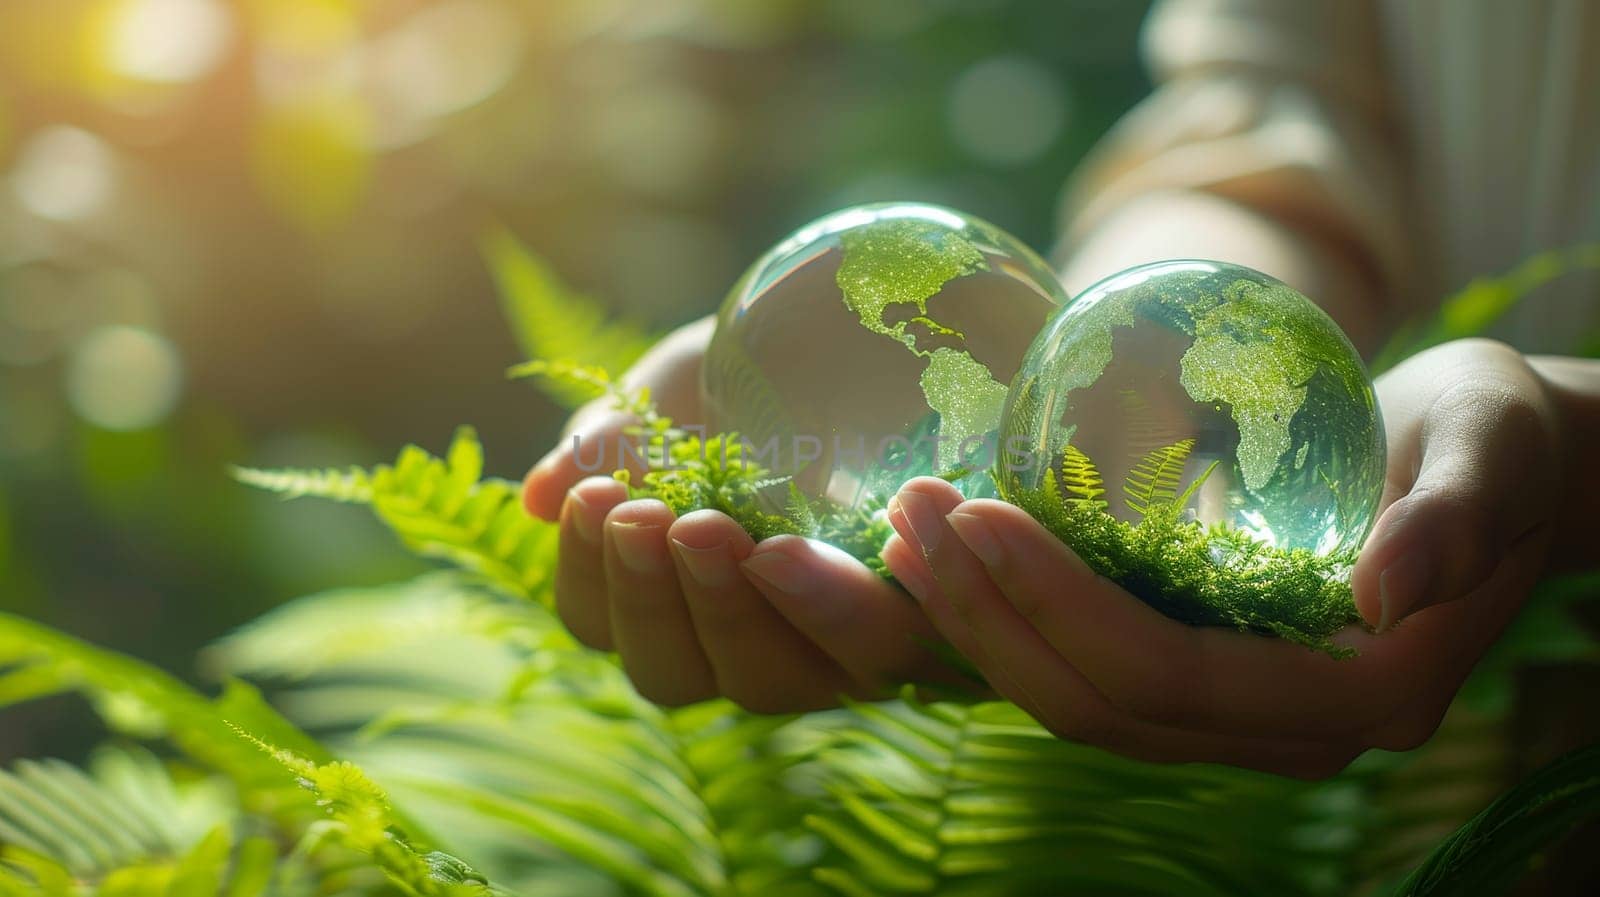 Hands holding Global communication networks with environmental icon on a green background. Concept for sustainable development goals (SDGs).